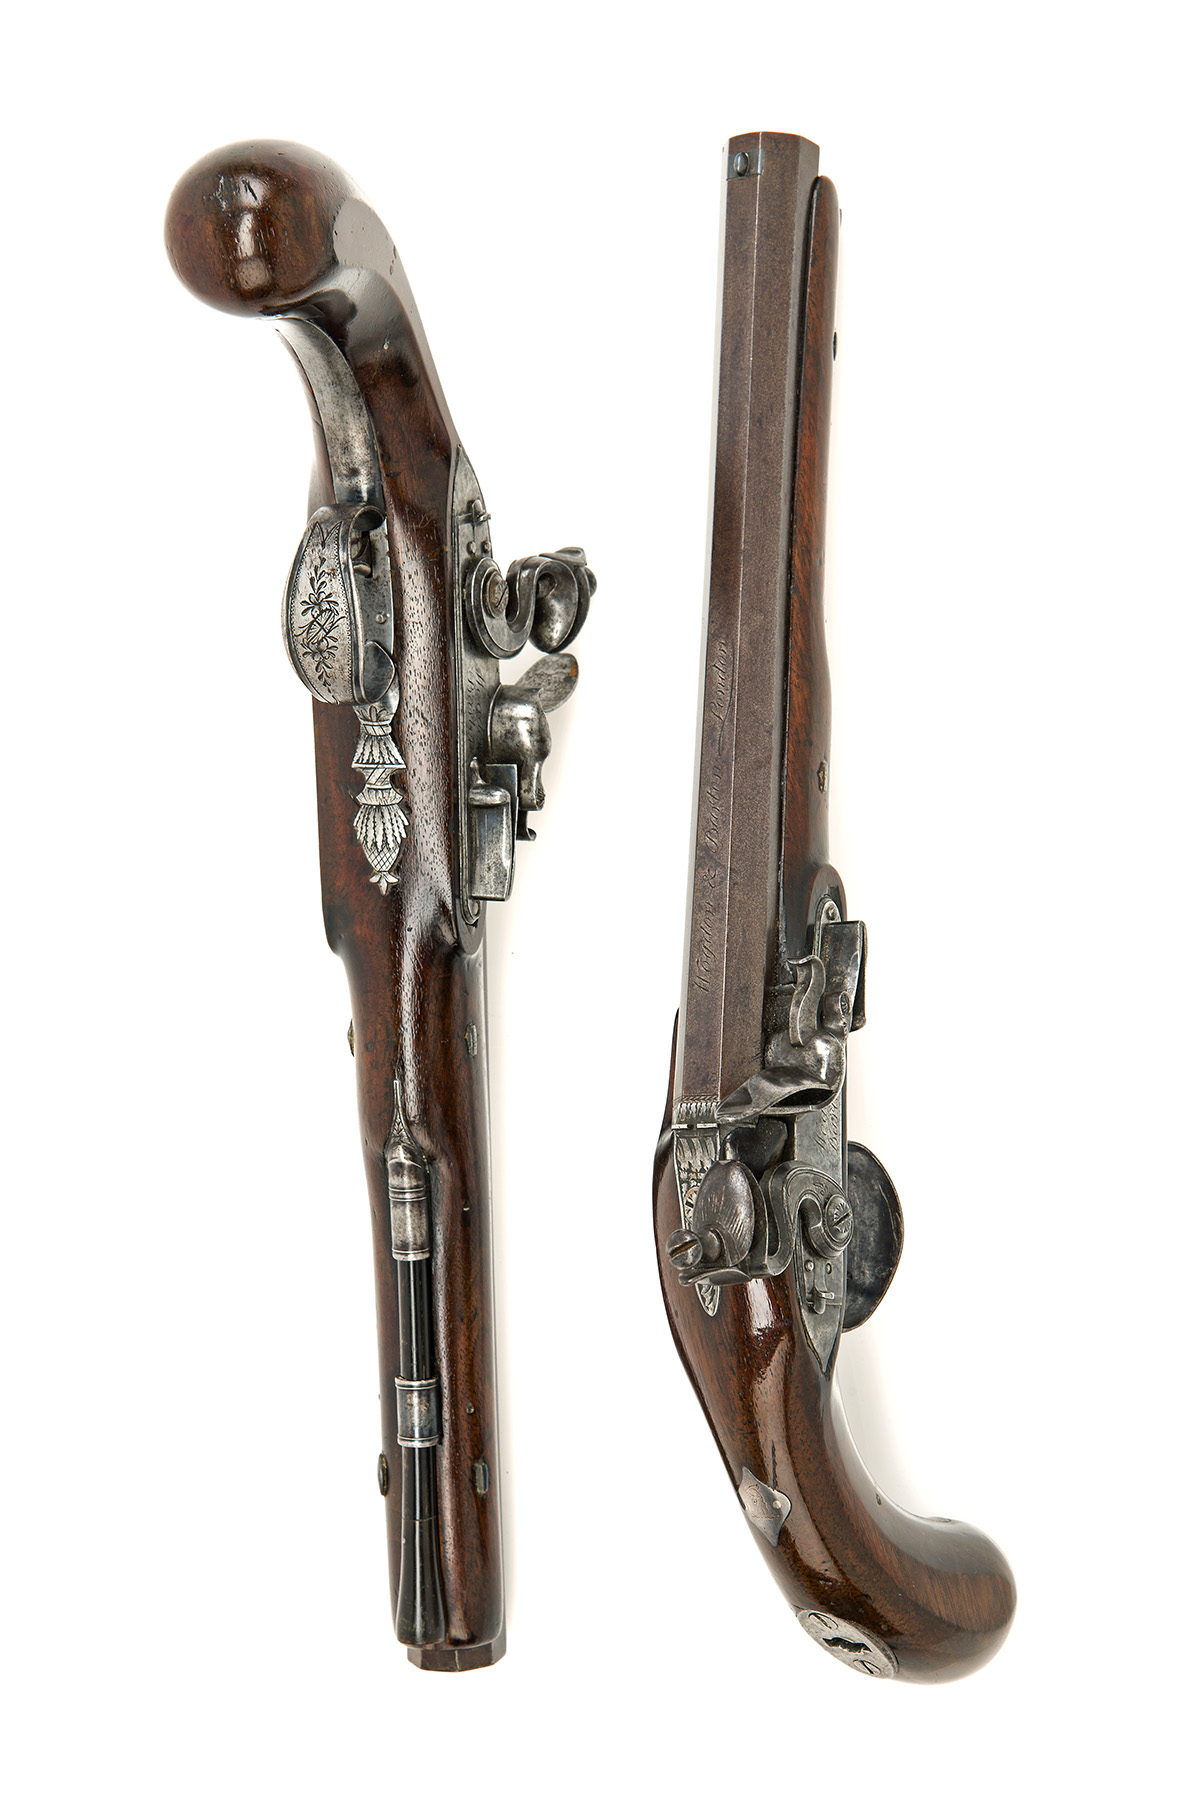 WOGDON & BARTON, LONDON A CASED PAIR OF 28-BORE FLINTLOCK OFFICER'S PISTOLS OF DUELLING STYLE WITH A - Image 3 of 9